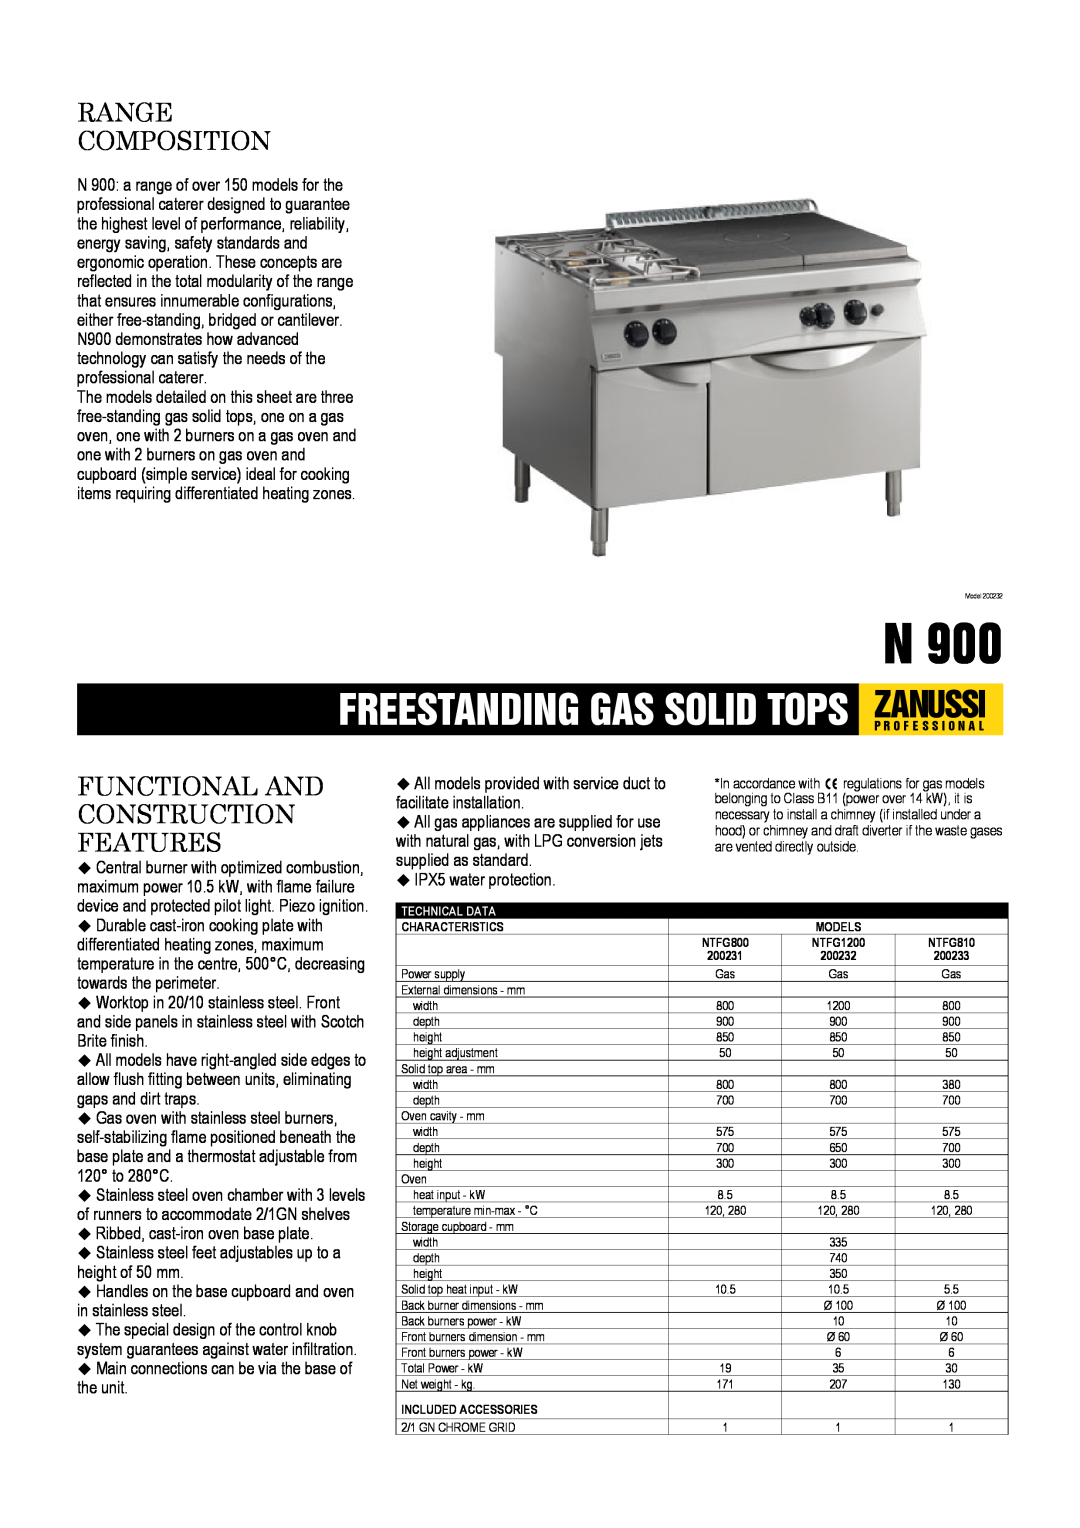 Electrolux NTFG810, NTFG1200 dimensions Freestanding Gas Solid Tops Zanussip R O F E S S I O N A L, Range Composition 